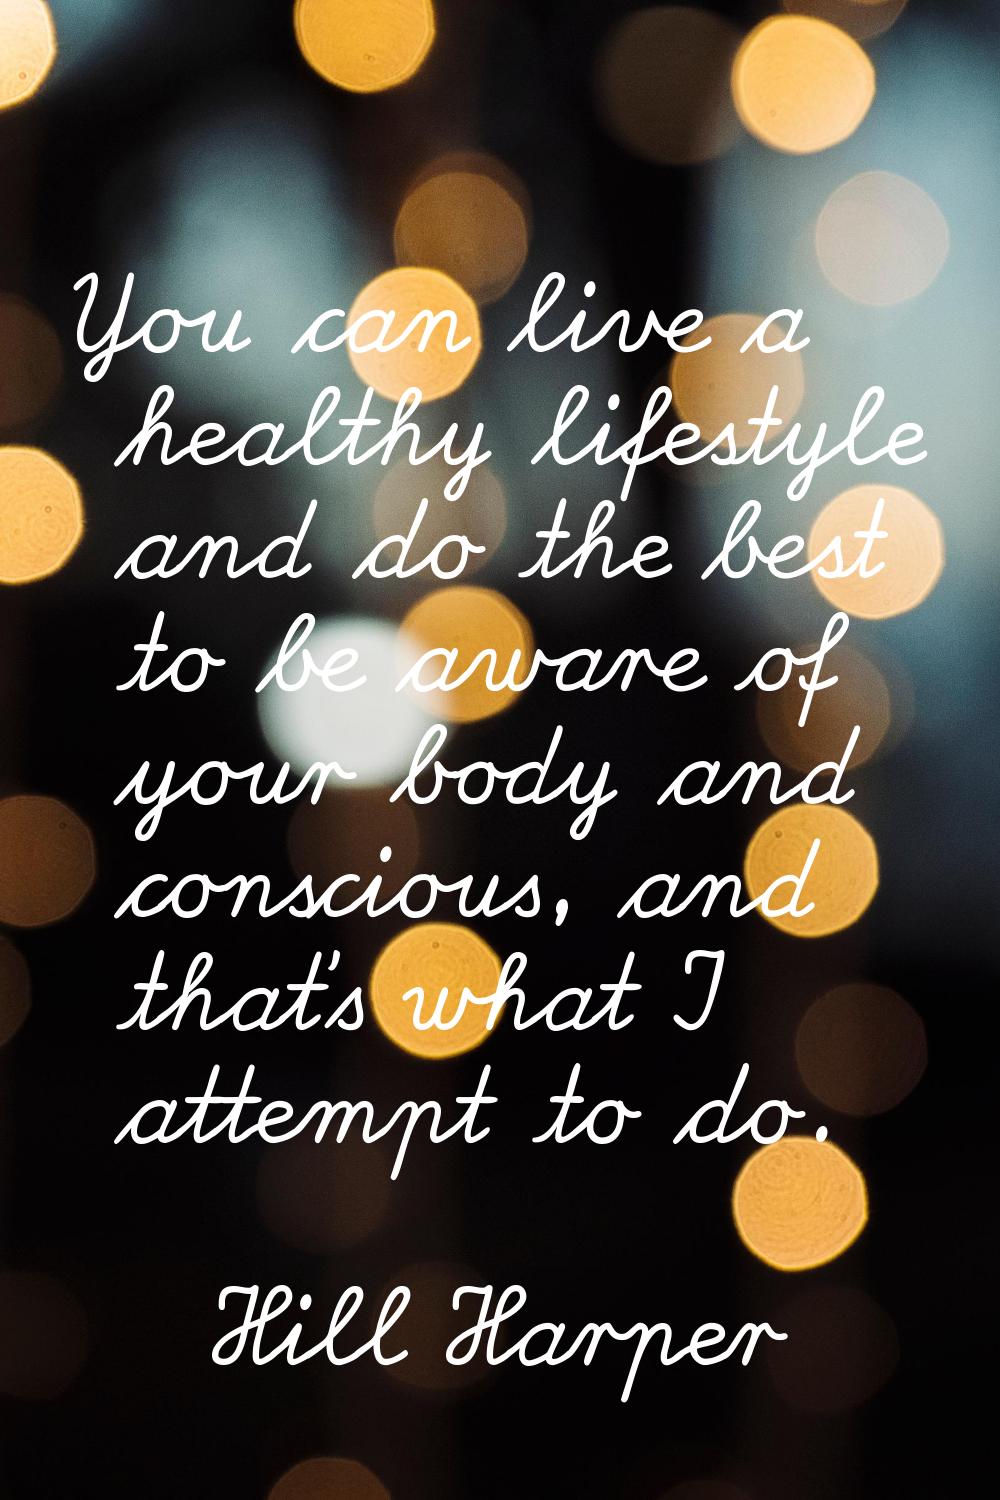 You can live a healthy lifestyle and do the best to be aware of your body and conscious, and that's